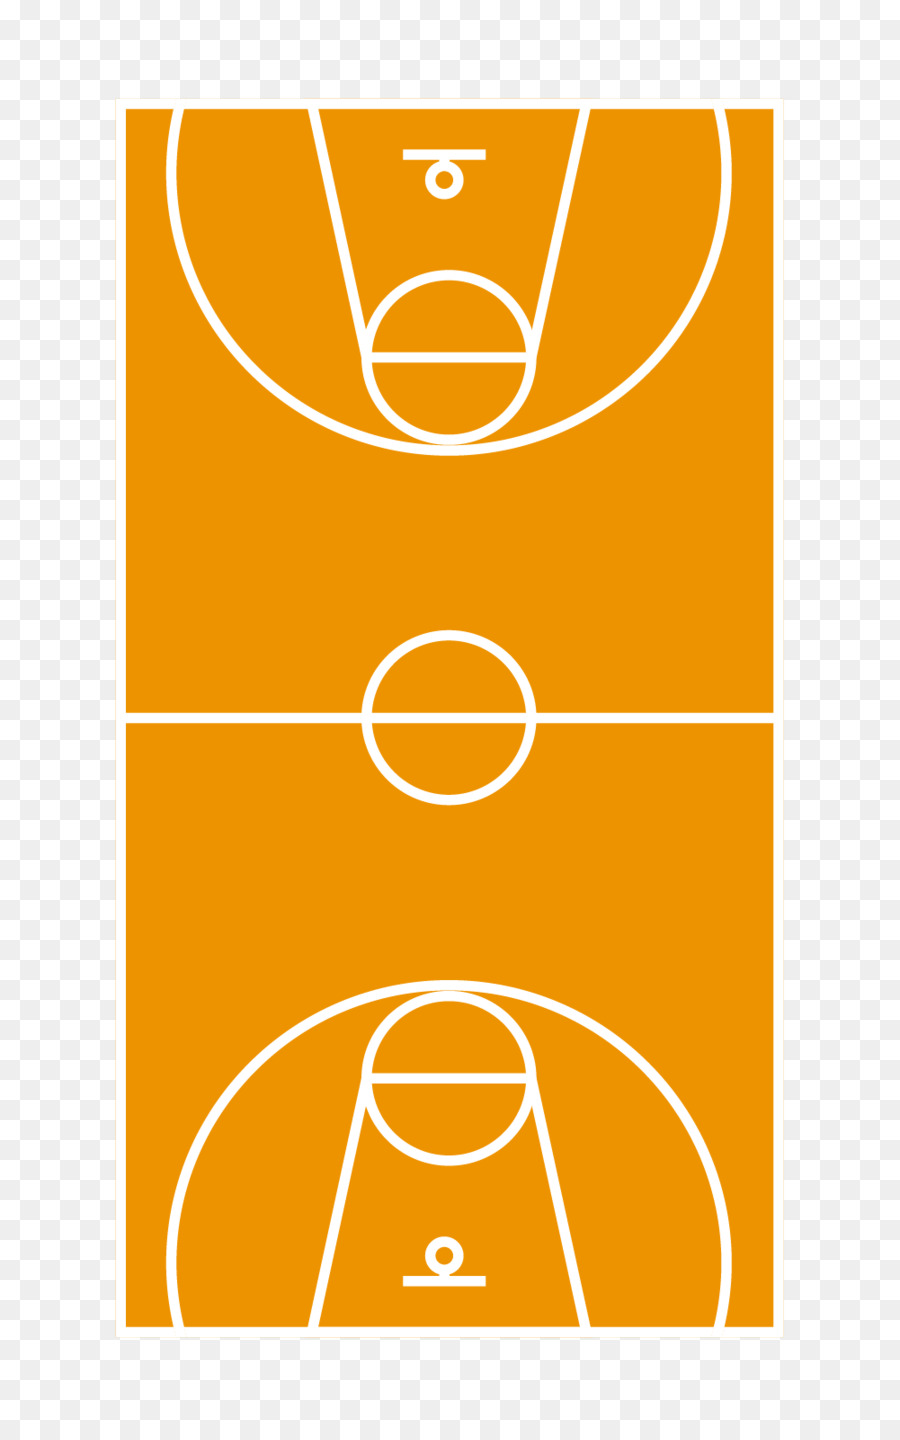 475 Basketball Court free clipart.